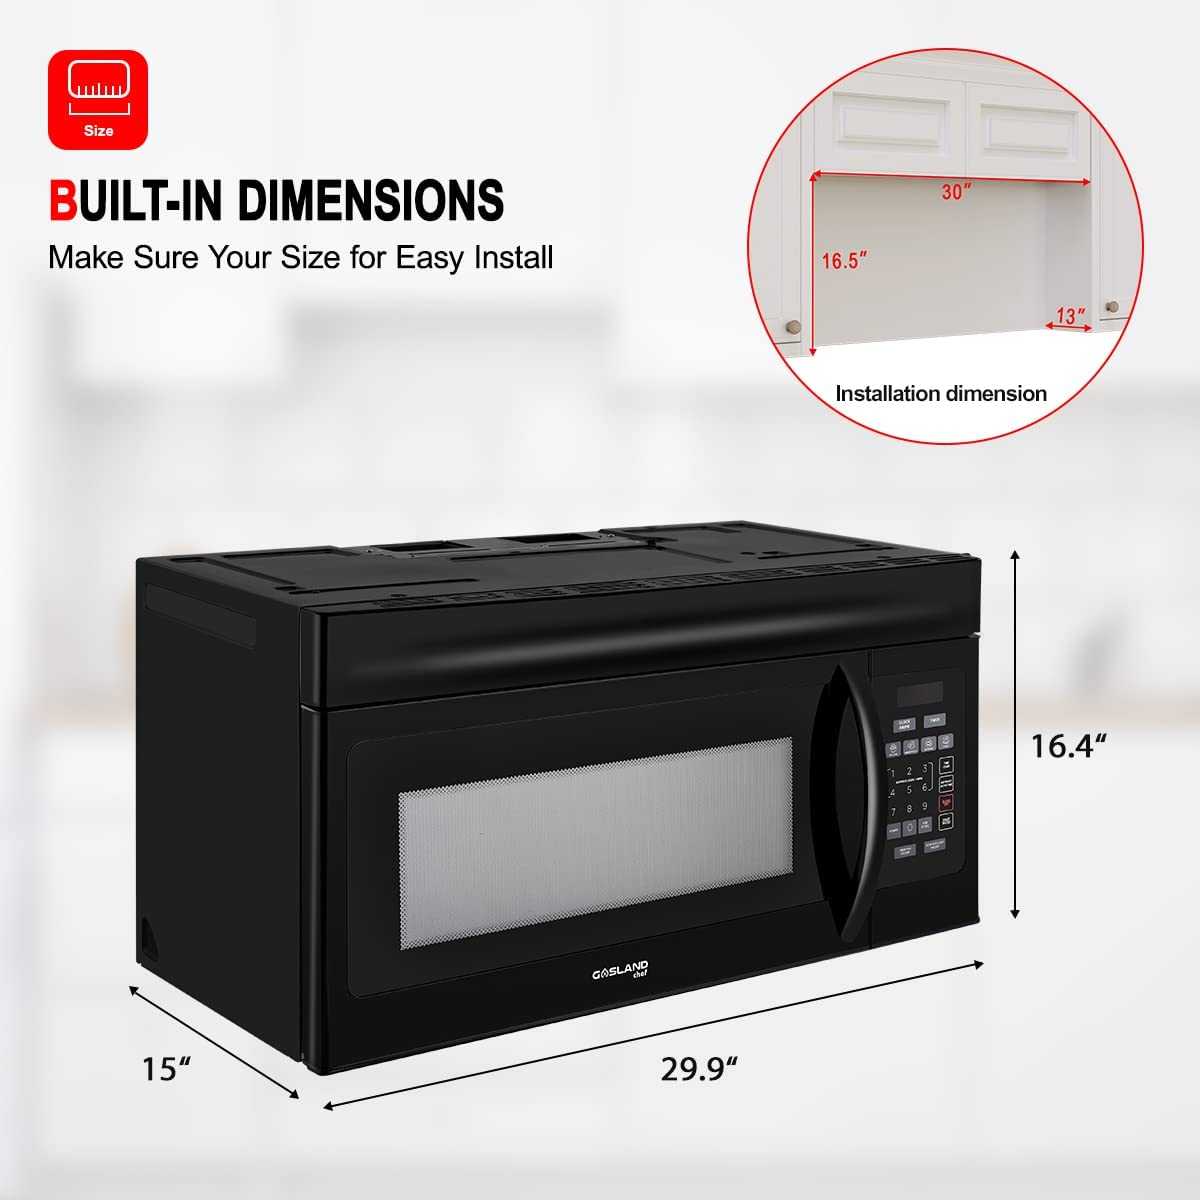 Gasland Chef Gasland 30 Inch Over-the-Range Microwave Ovenwith 1.6 Cu. Ft. Capacity, 300 CFM in Black